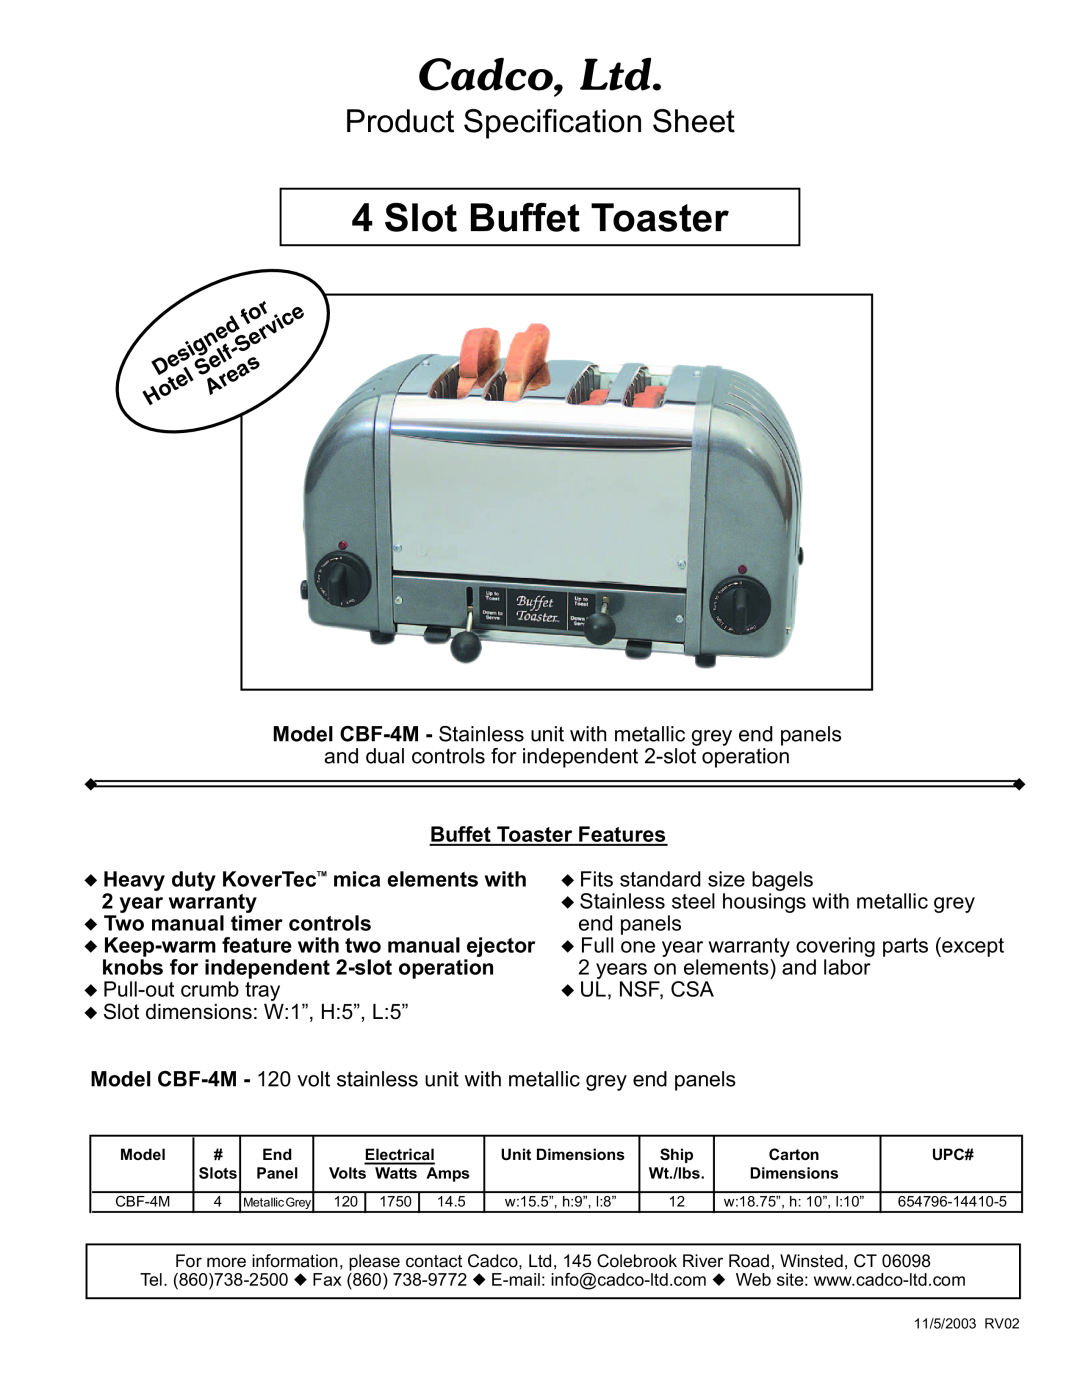 Cadco CBF-4M specifications Slot Buffet Toaster, Product Specification Sheet, Buffet Toaster Features 